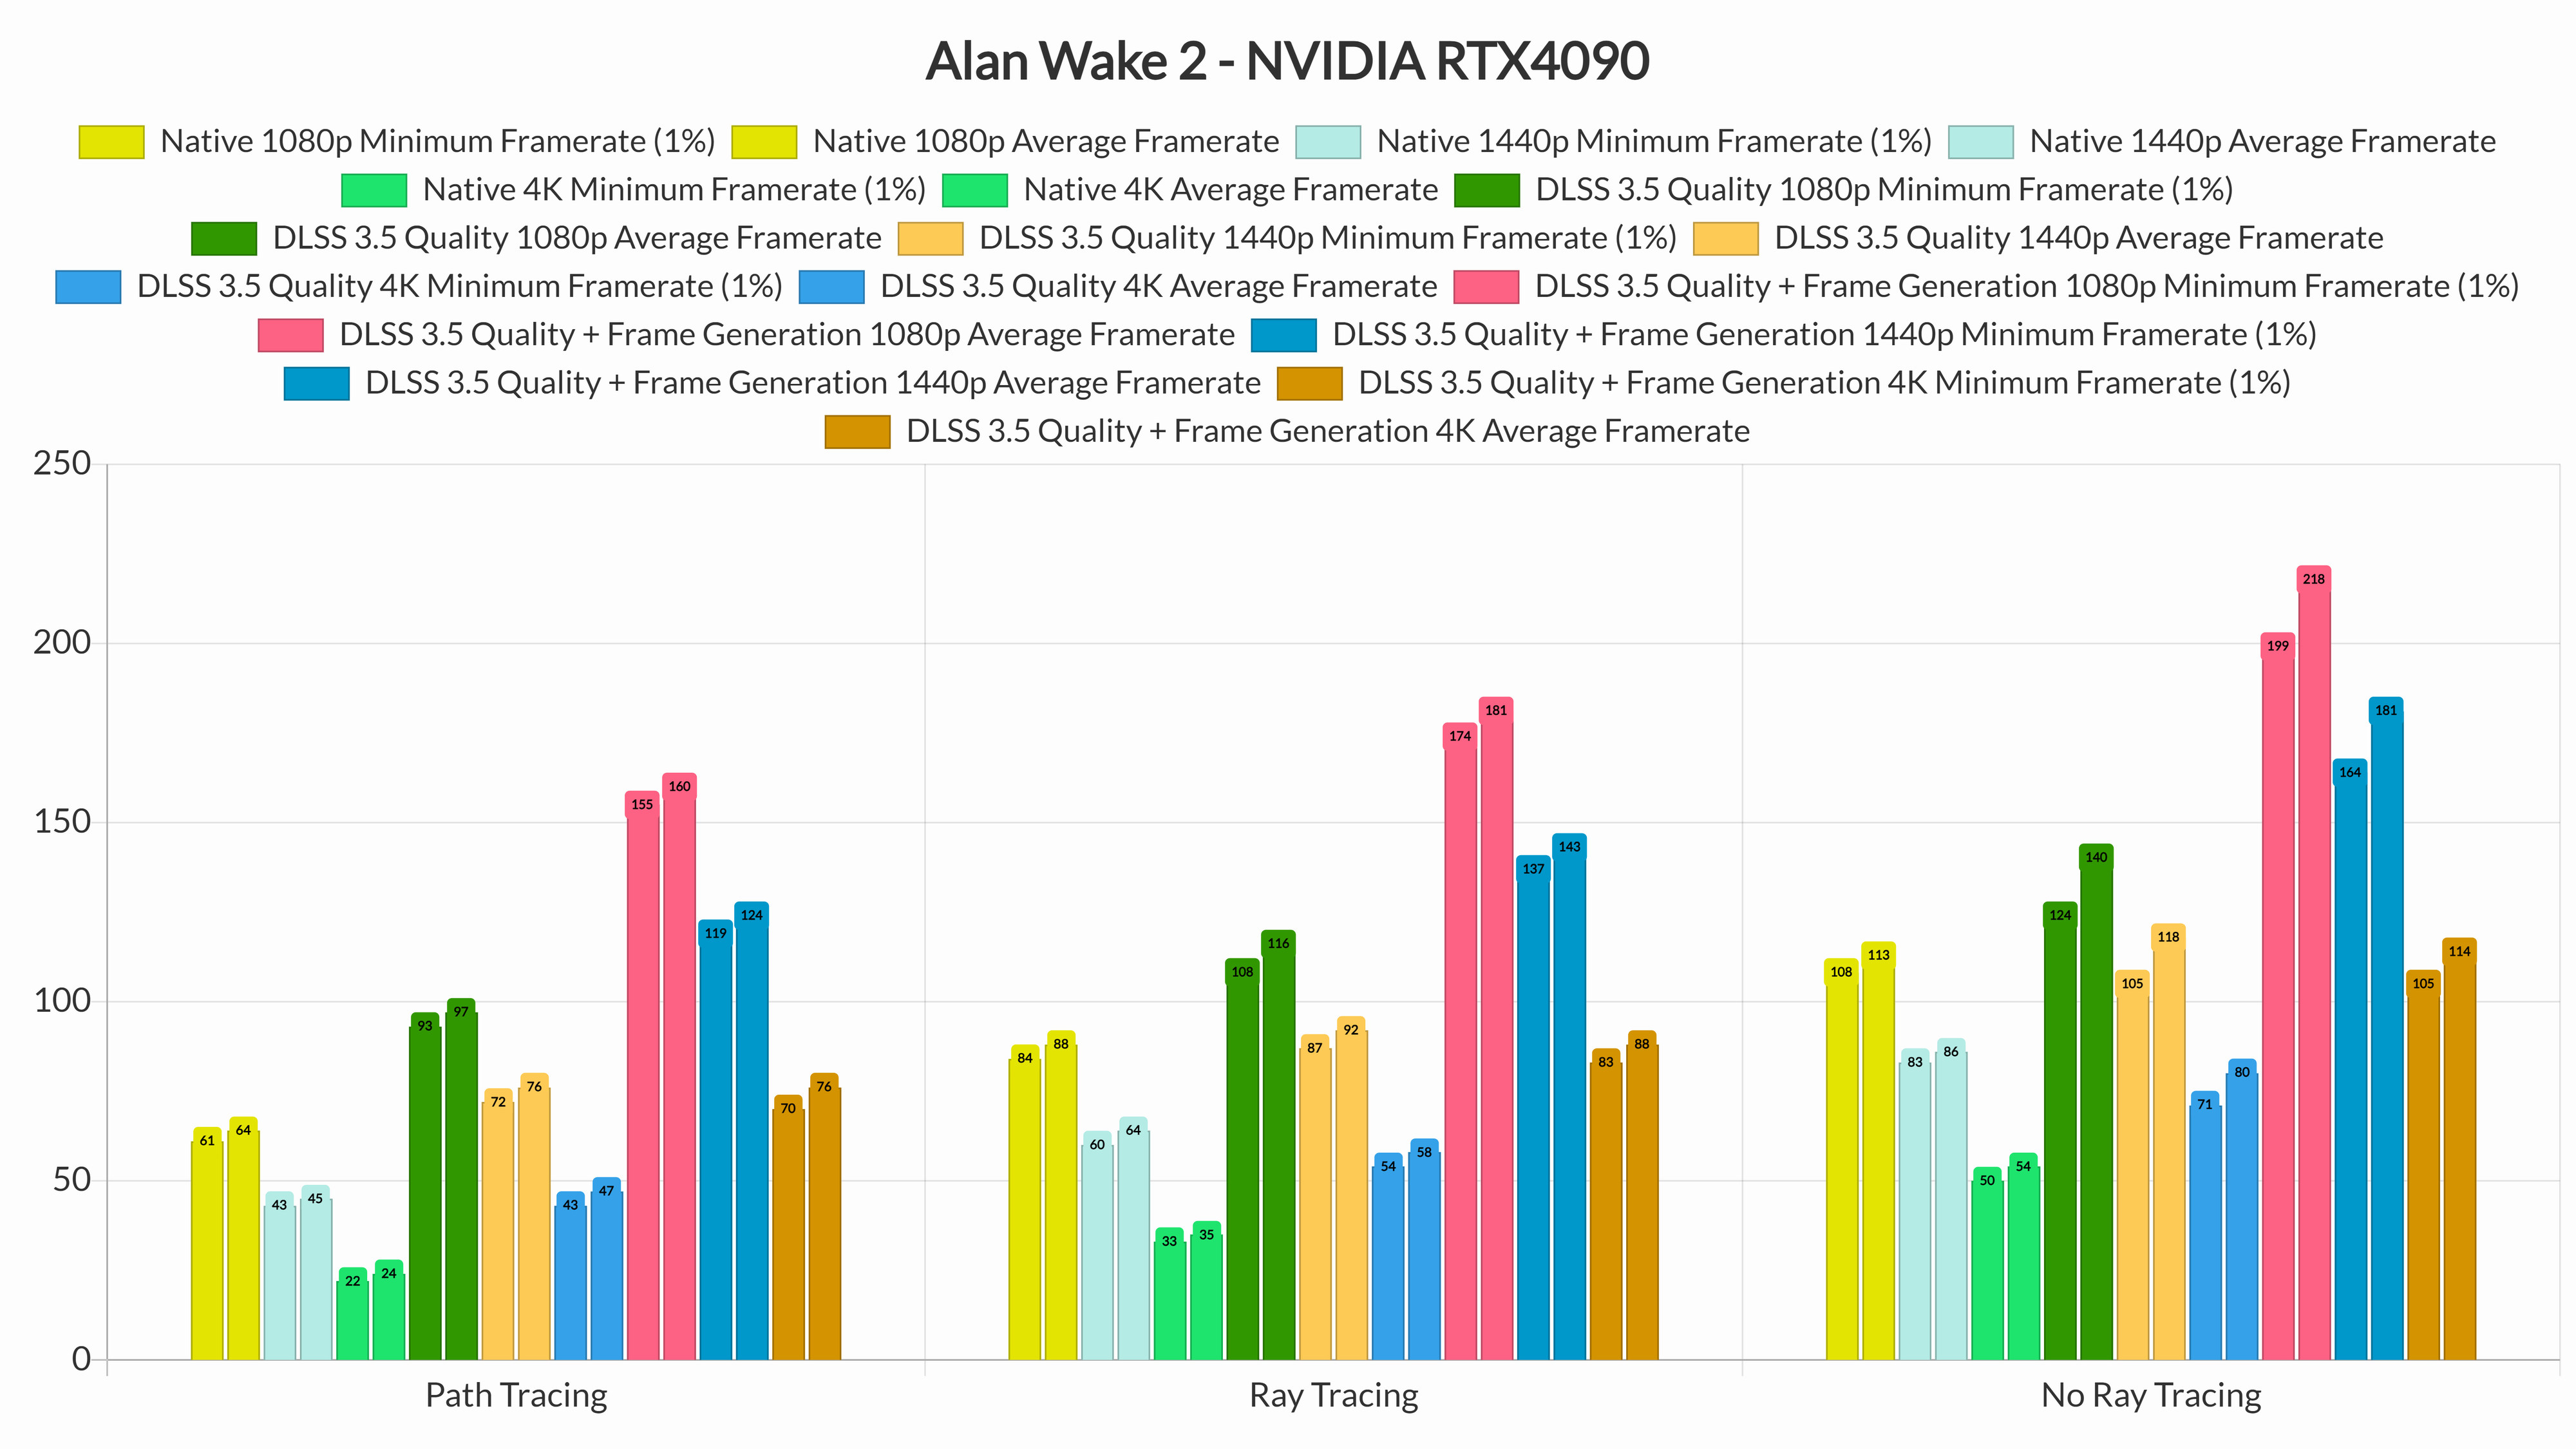 Alan Wake 2 PC Performance Impressions: NVIDIA DLSS 3.5 With Path